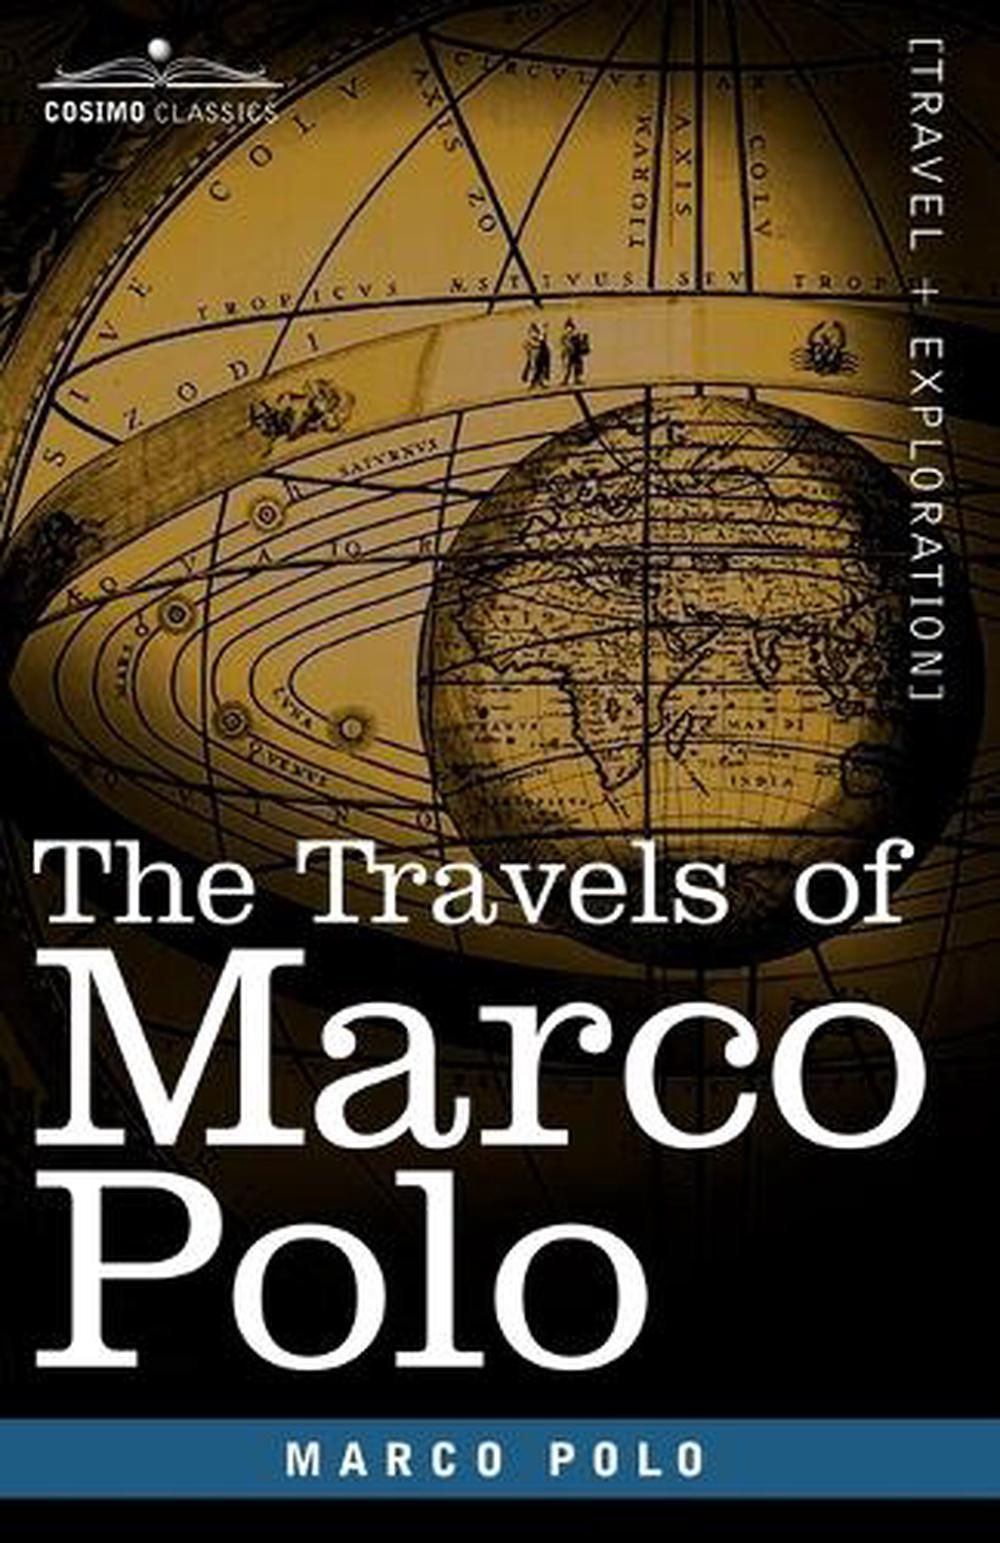 the book of travels